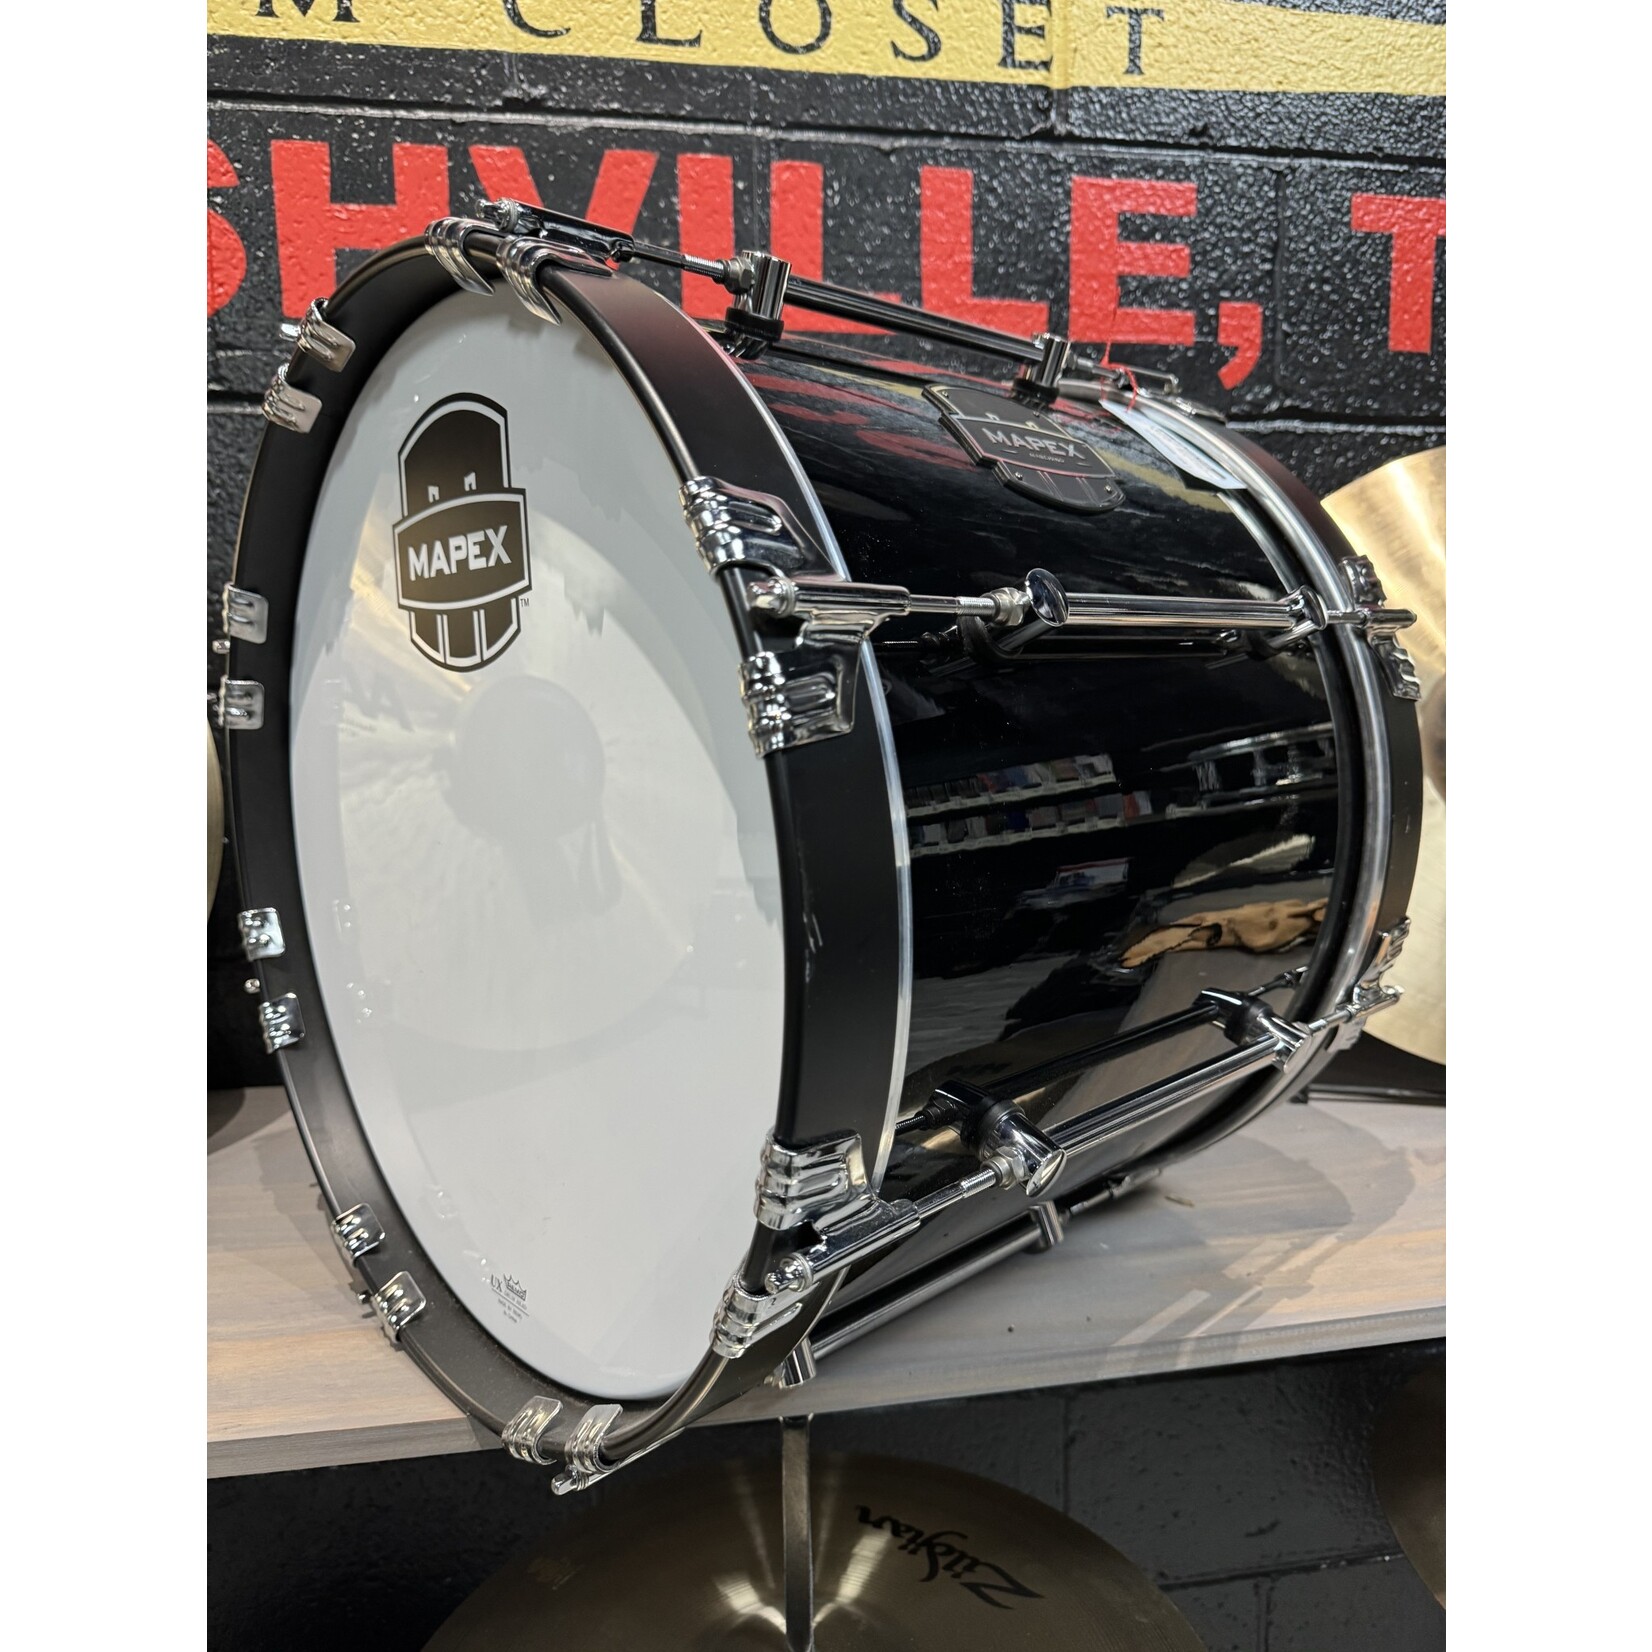 Mapex USED Mapex 18" Marching Bass Drum - Black